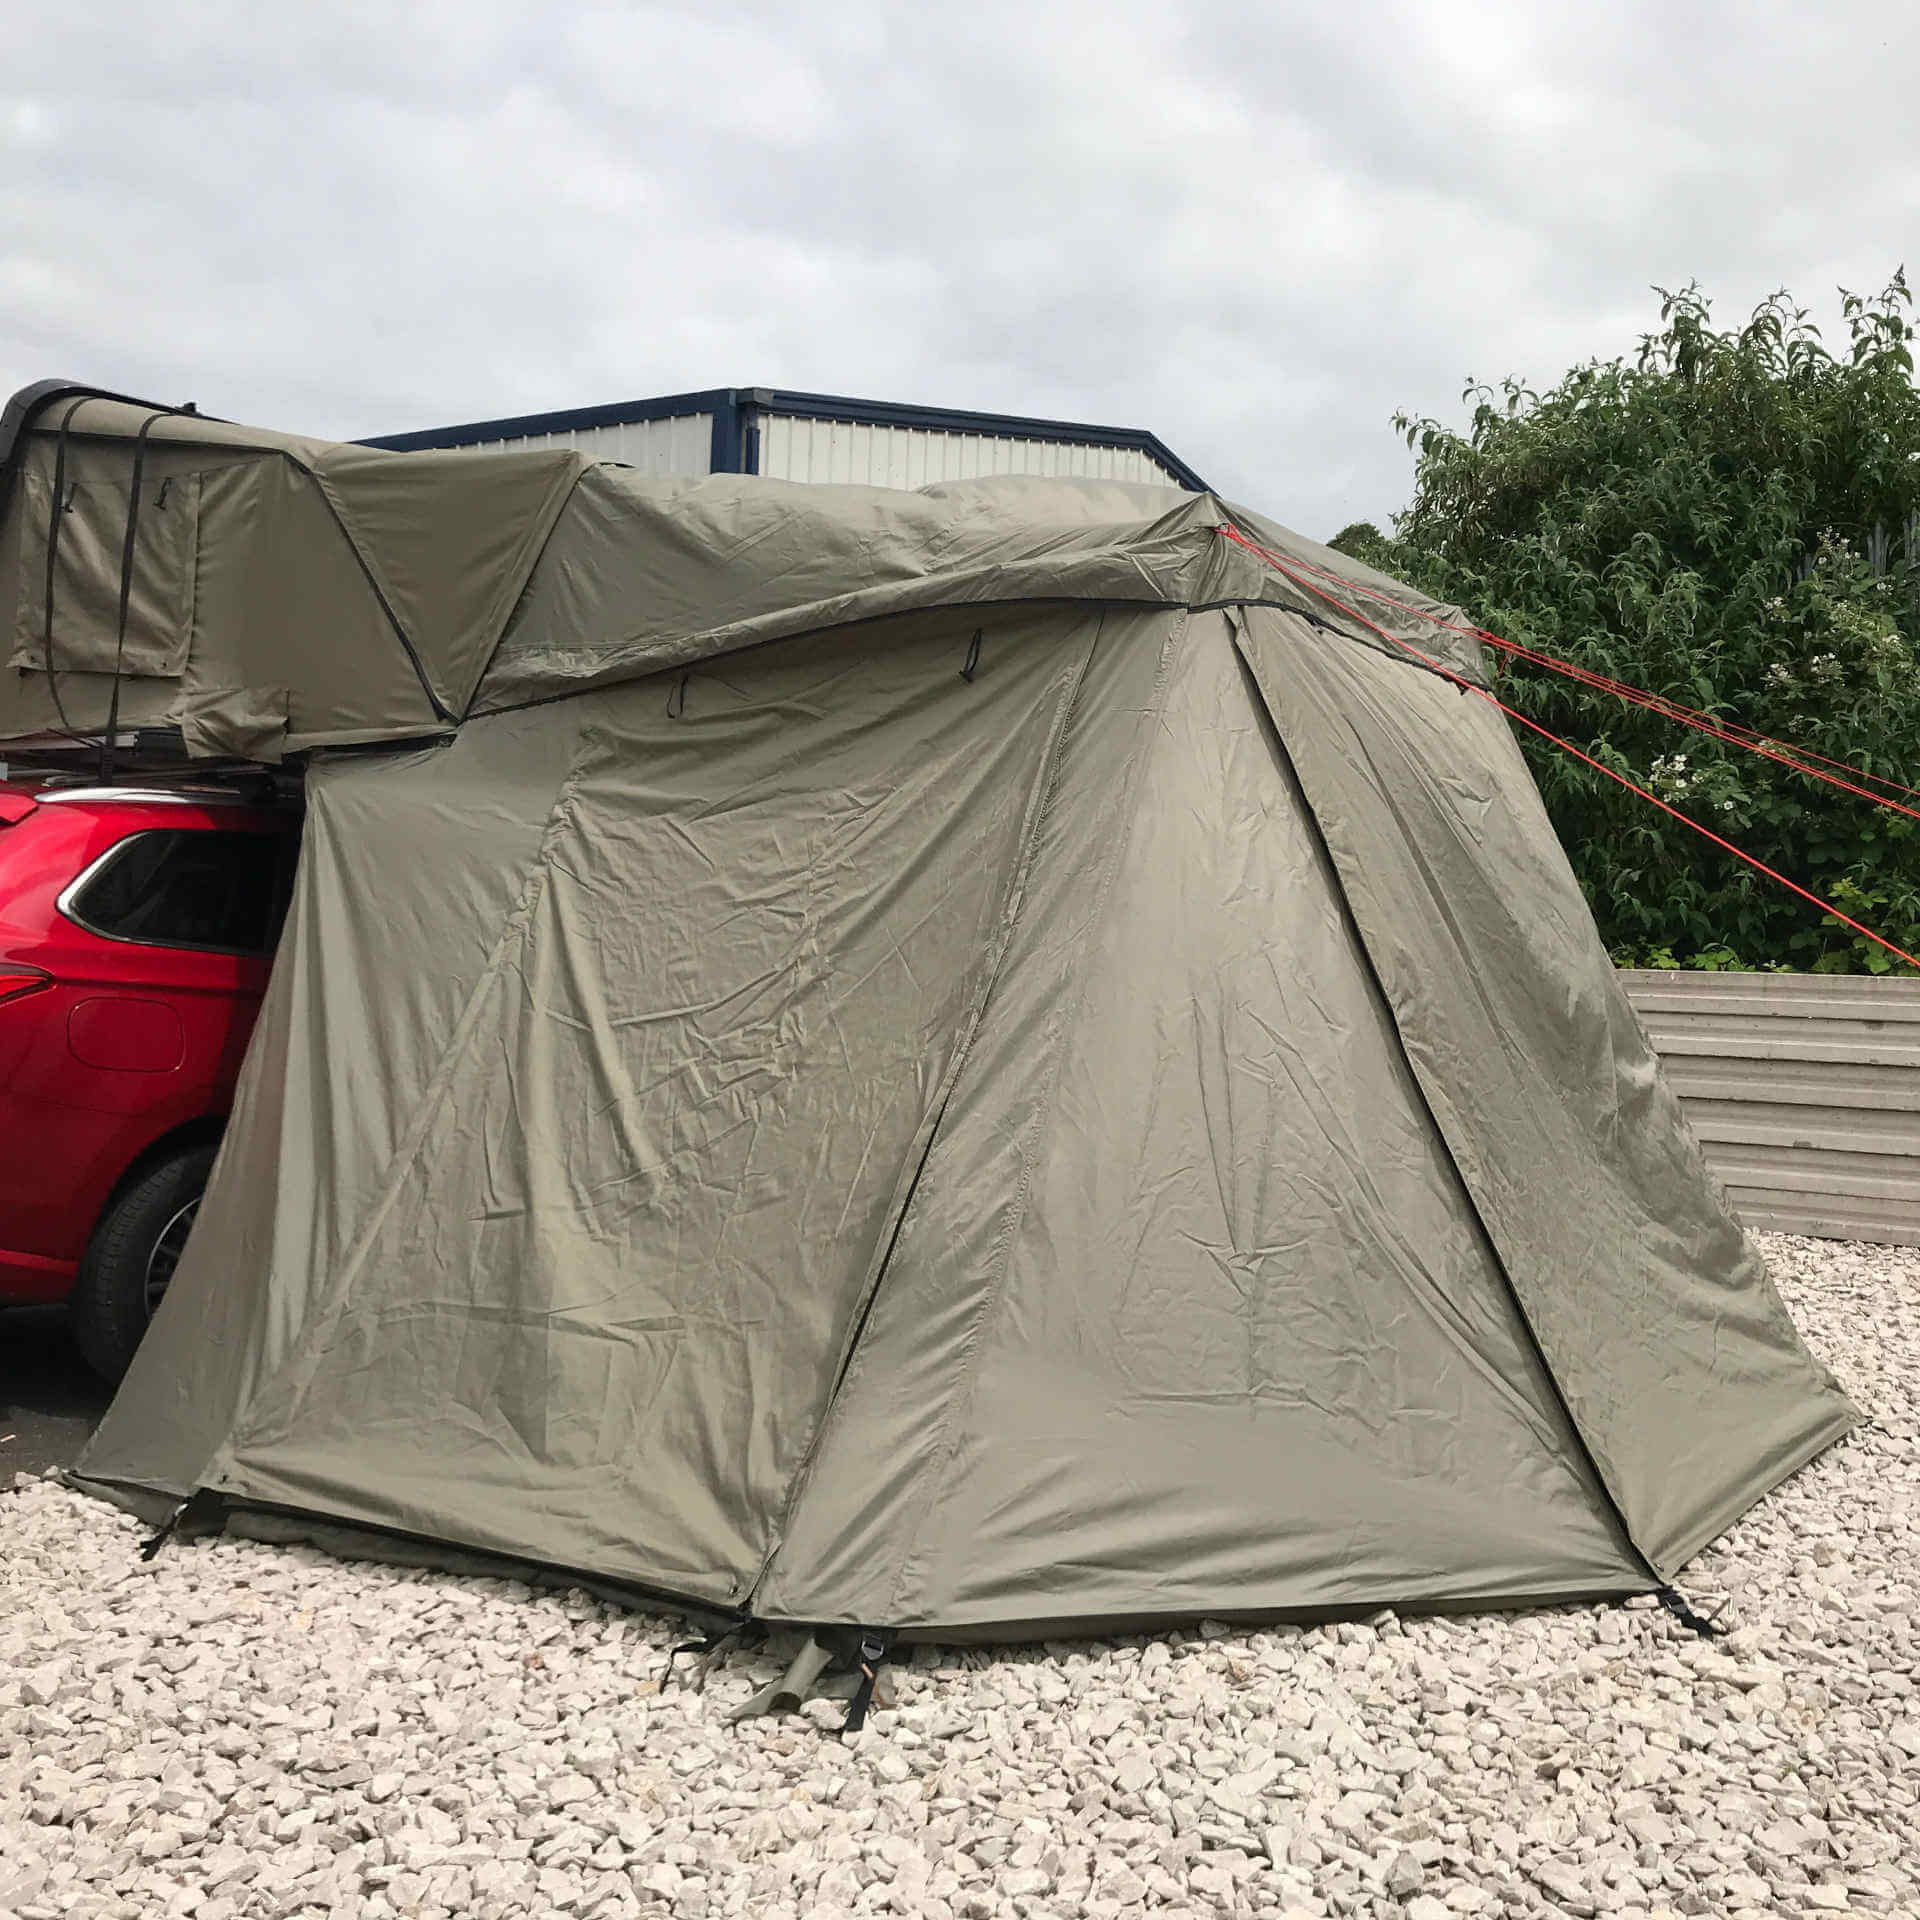 Annex Addon for the Direct4x4 RoofTrekk 3 Person Roof Top Camping Tent in Green -  - sold by Direct4x4